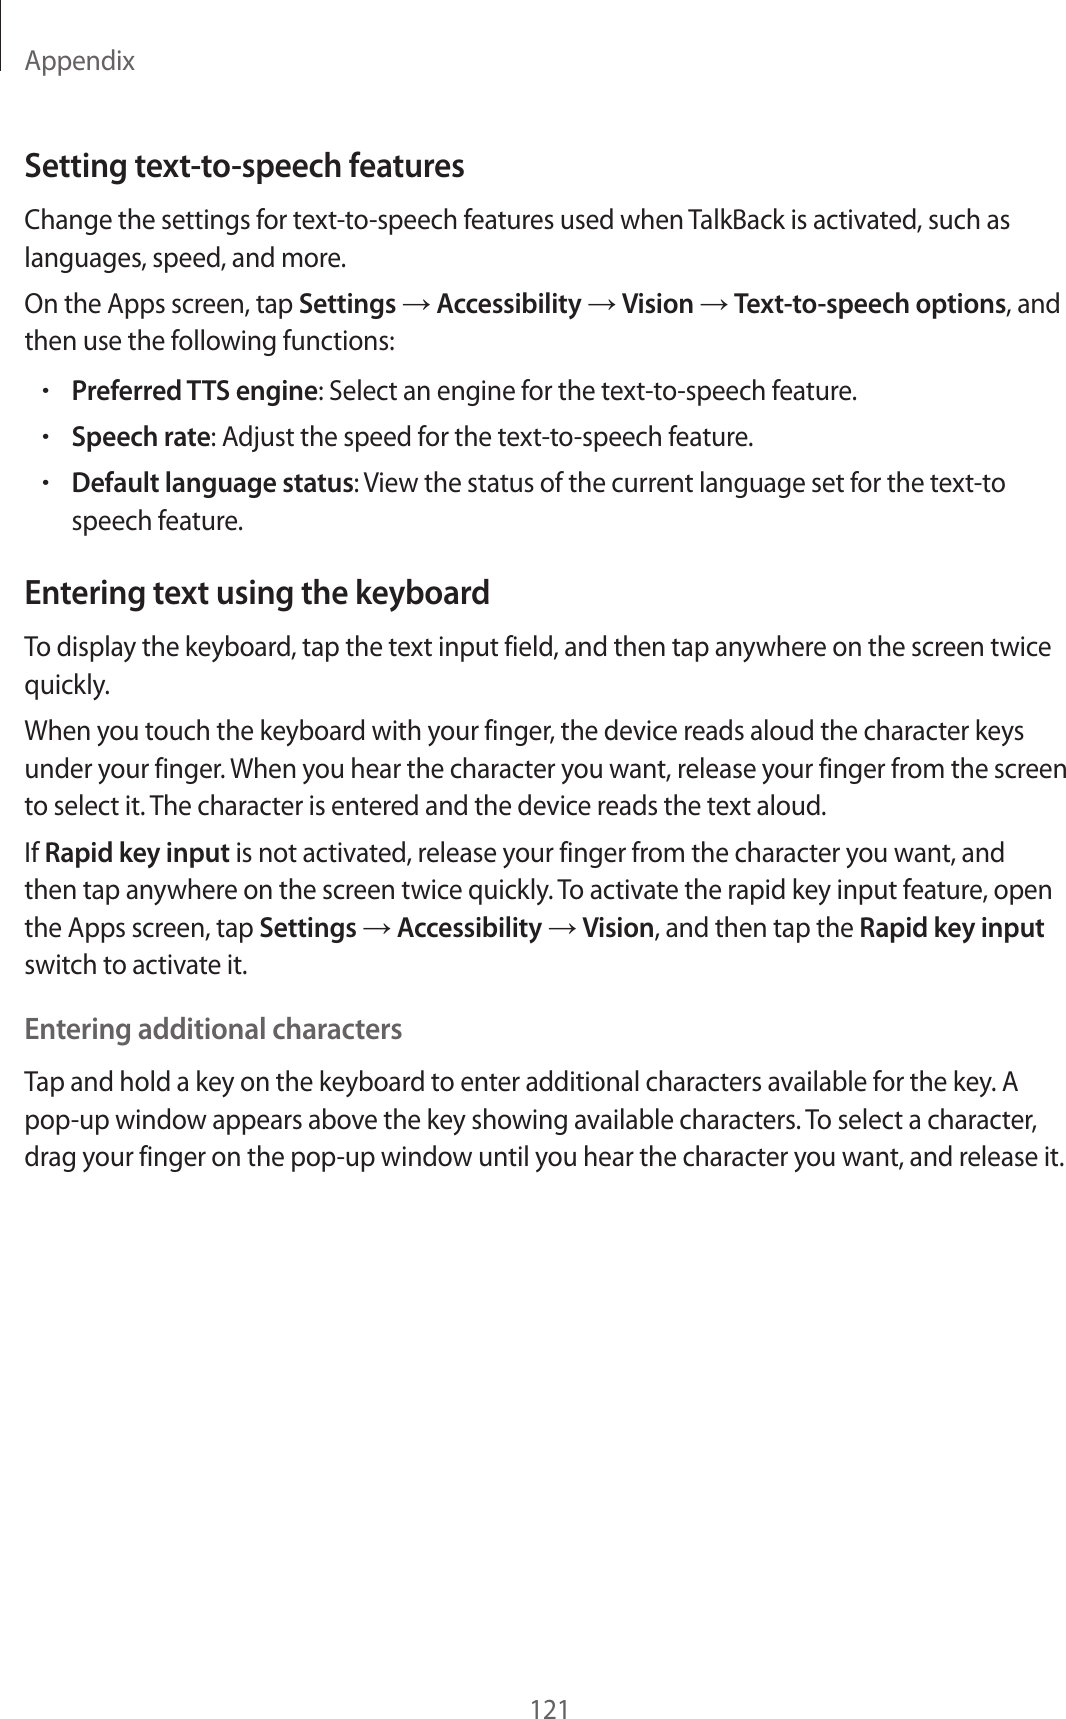 Appendix121Setting text-to-speech featur esChange the settings for t ext-to-speech featur es used when TalkBack is activated , such as languages, speed , and mor e .On the Apps screen, tap Settings  Accessibility  Vision  Text-to-speech options, and then use the follo wing functions:•Preferred TTS engine: Select an engine f or the t ext-to-speech featur e .•Speech rat e: Adjust the speed f or the t ext-to-speech featur e .•Default language status: View the status of the curr ent language set for the text-to speech featur e.Entering t e xt using the keyboardTo display the keyboar d , tap the text input field, and then tap an ywhere on the scr een twice quickly.When you t ouch the keyboar d with y our finger, the device reads aloud the character keys under your finger. When you hear the character you wan t, r elease y our finger fr om the scr een to select it. The character is enter ed and the devic e r eads the te xt aloud.If Rapid key input is not activated, r elease y our finger fr om the character y ou want , and then tap anywhere on the scr een twice quickly. To activat e the rapid key input f ea tur e , open the Apps screen, tap Settings  Accessibility  Vision, and then tap the Rapid key input switch to activate it.Entering additional char actersTap and hold a key on the keyboard to ent er additional characters av ailable f or the key. A pop-up window appears above the key showing a v ailable characters. To select a character, drag your finger on the pop-up window until y ou hear the character y ou want , and r elease it.